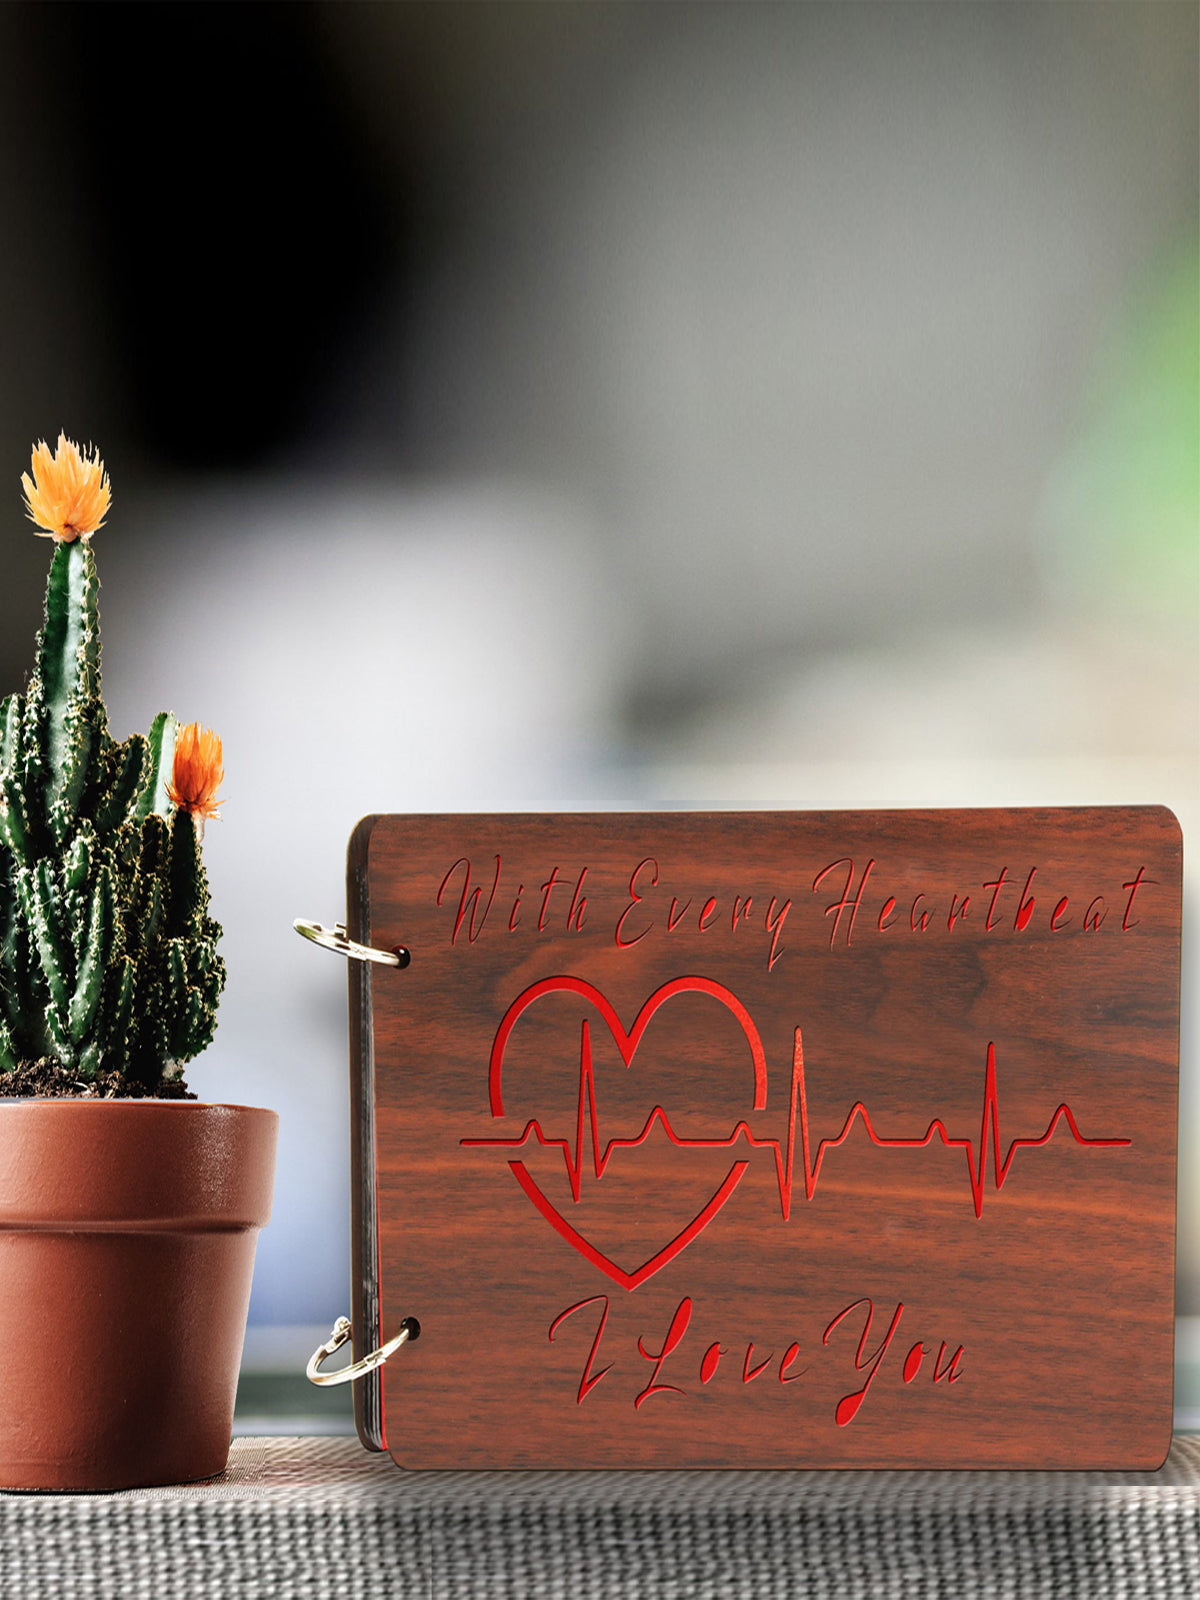 Wooden 'With Every Heartbeat, I Love You' Photo Album For Gifting & Memories